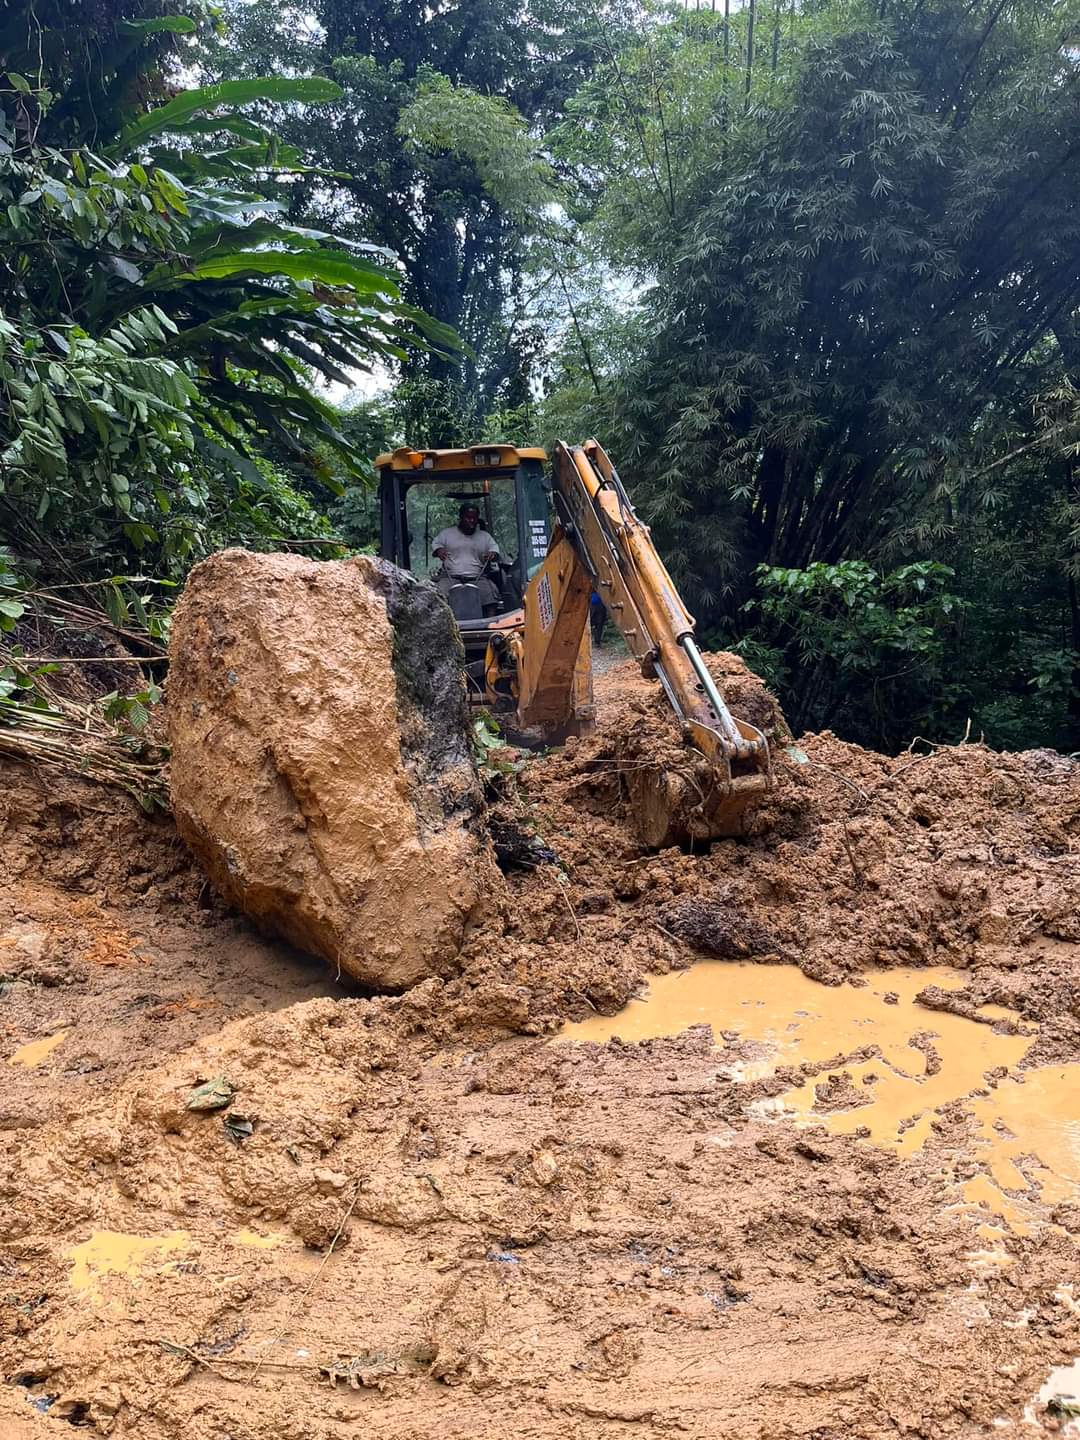 TPRC response team hit the ground running to clear blockage on Blanchisseuse road